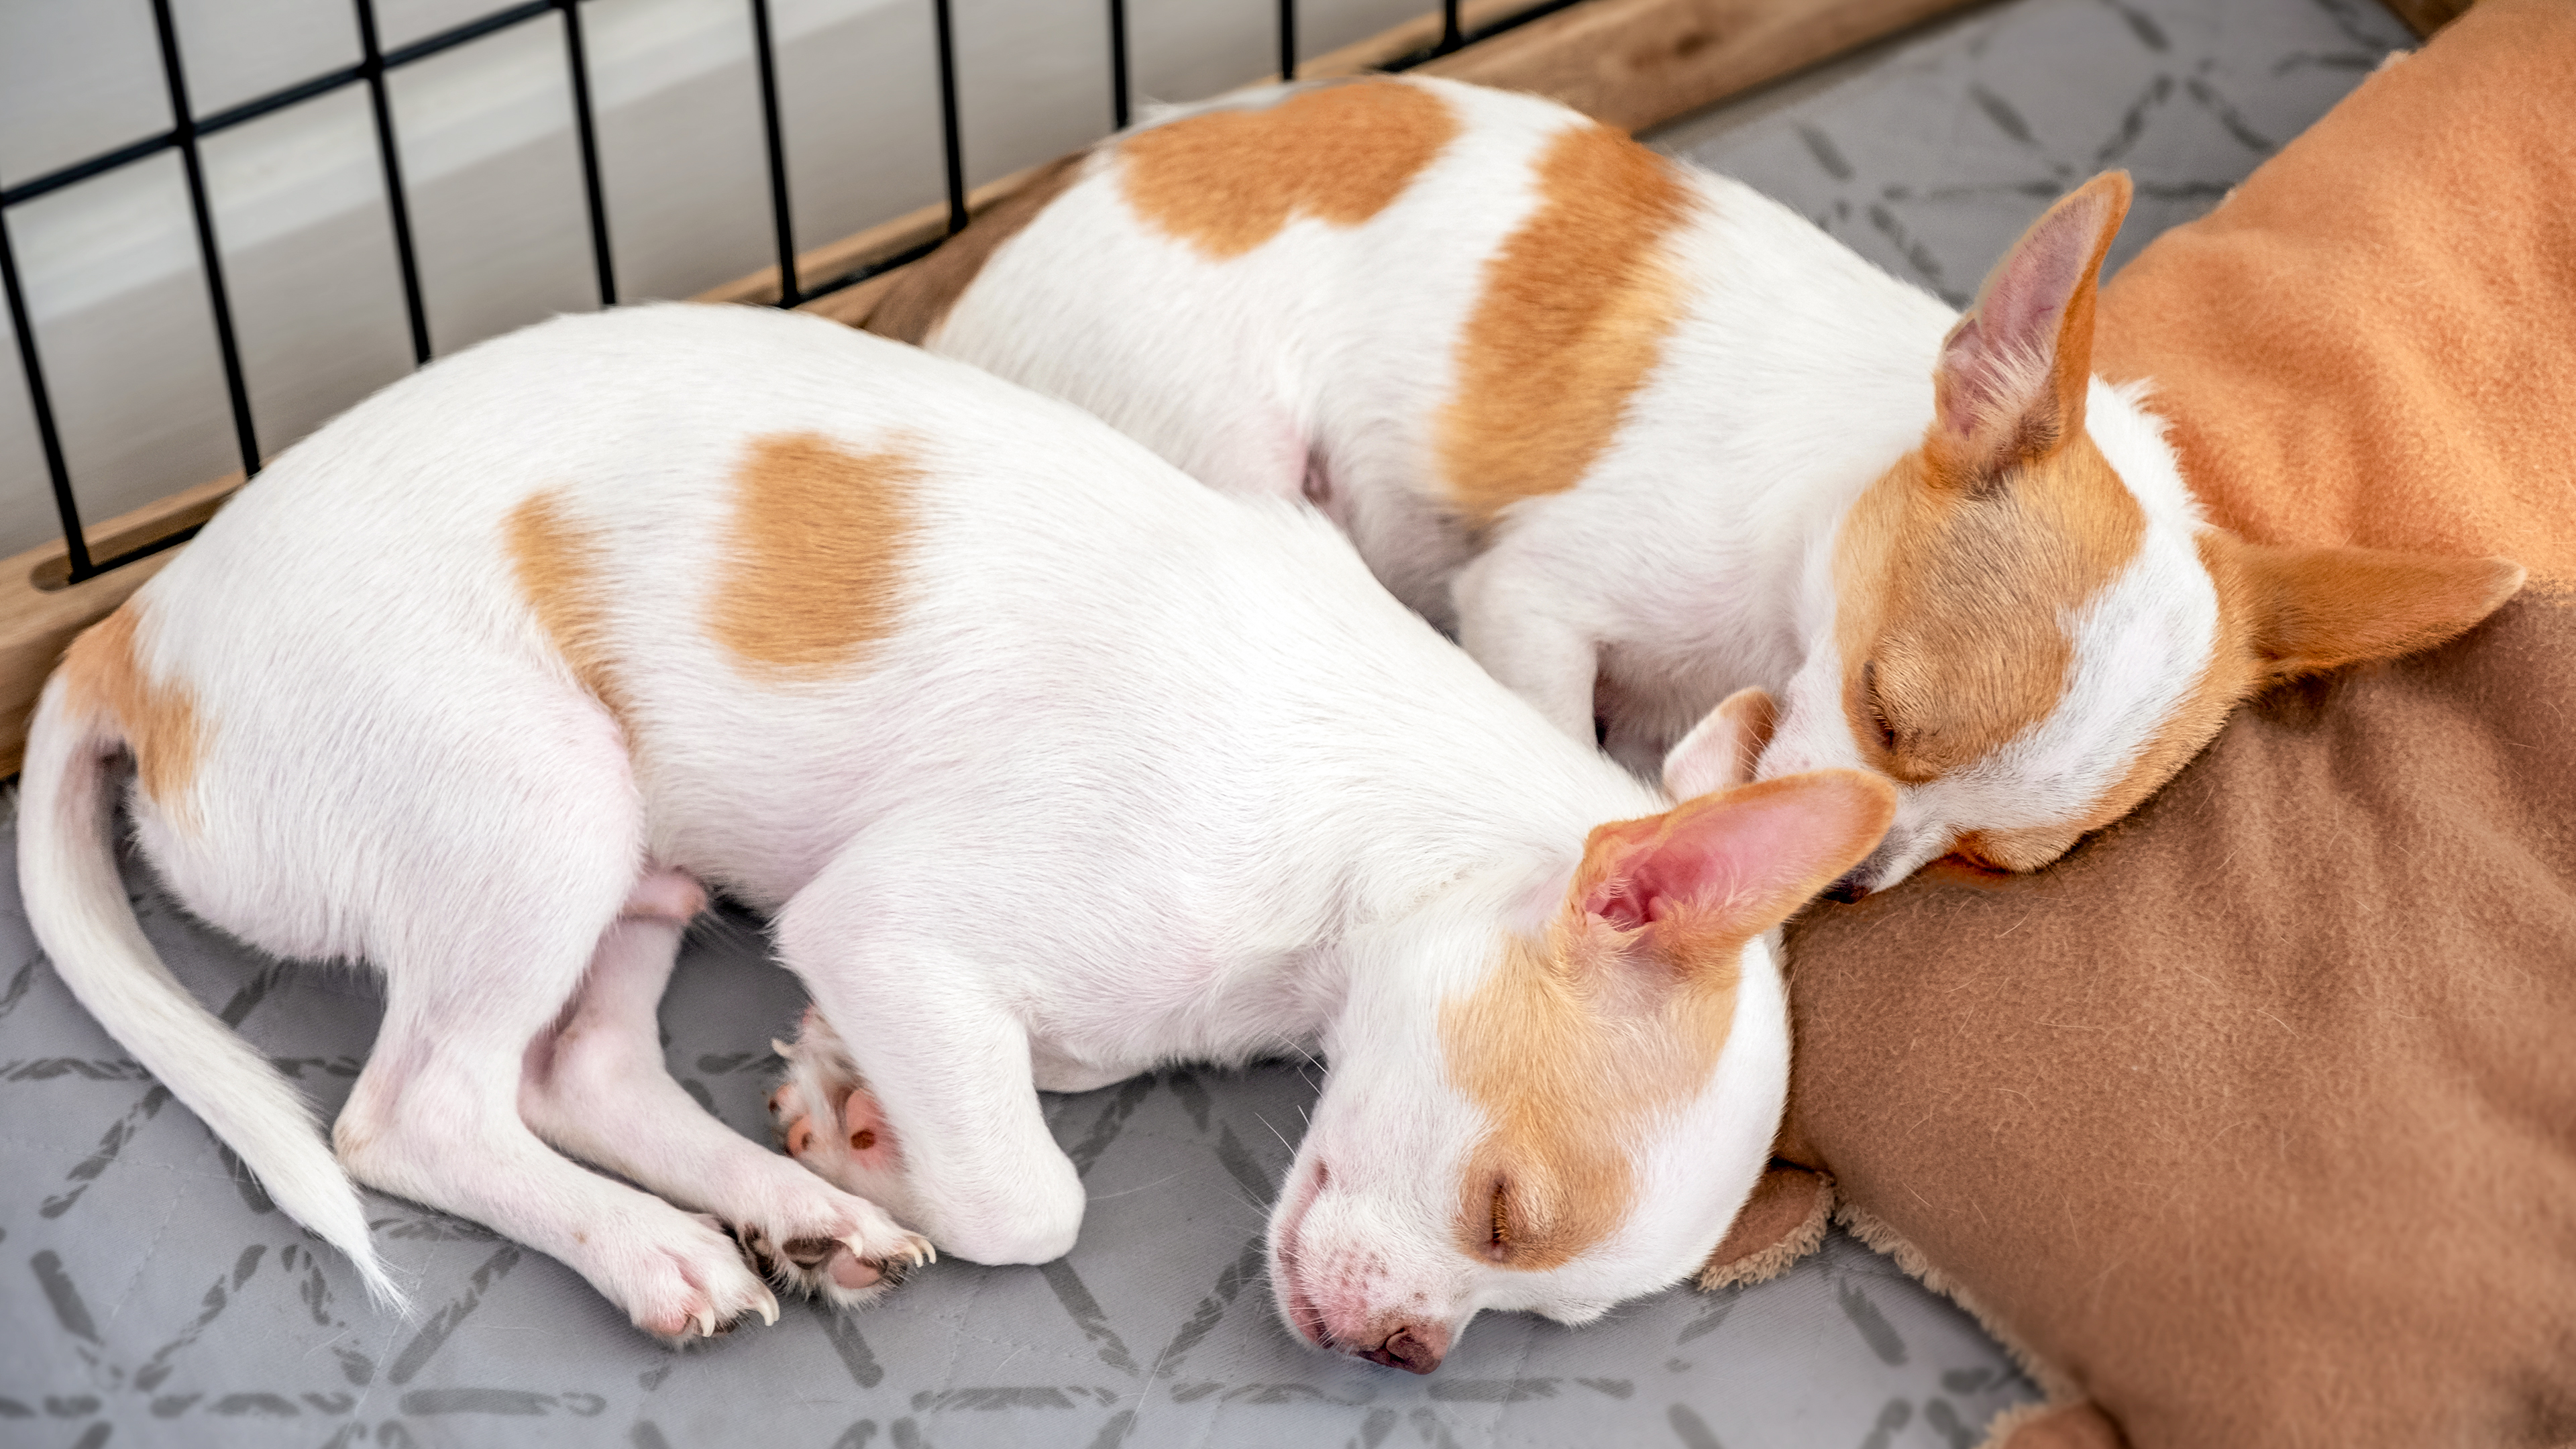 Chihuahua puppies sleeping in a dog crate